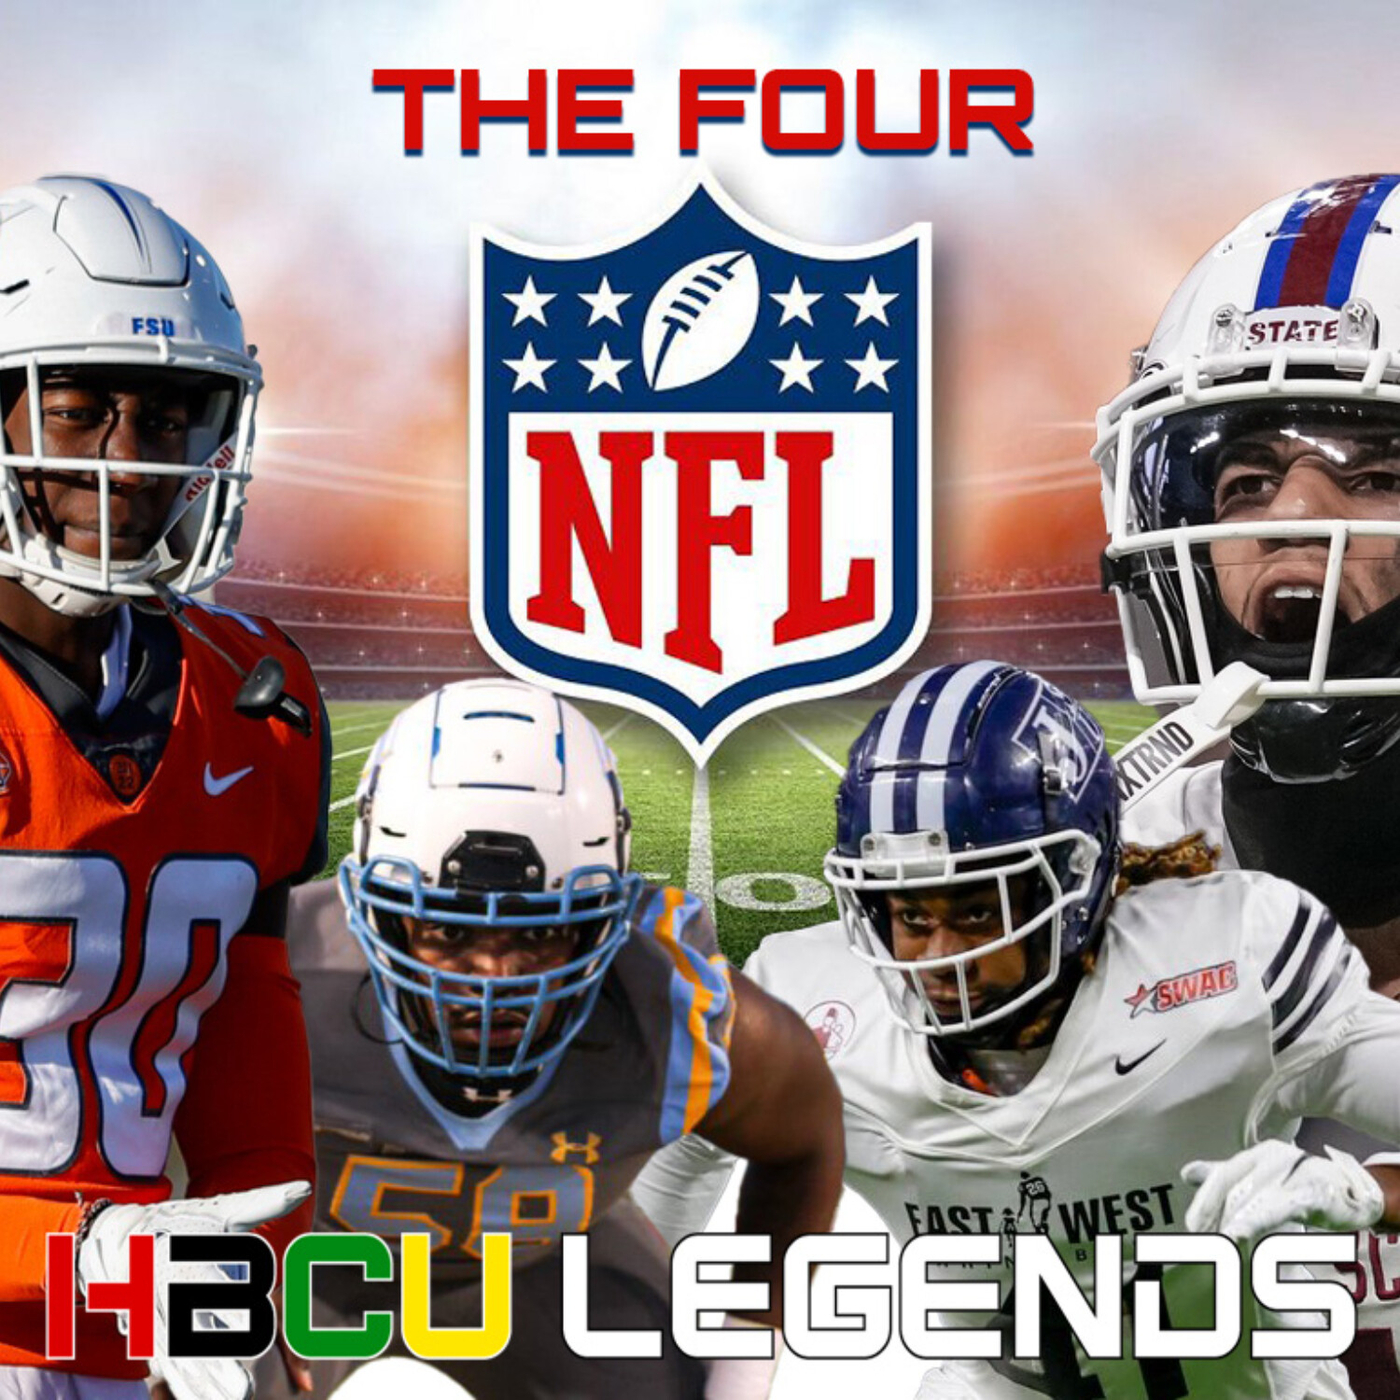 THE FOUR HBCU PLAYERS DRAFTED IN 2022 HBCU Legends Podcast.co